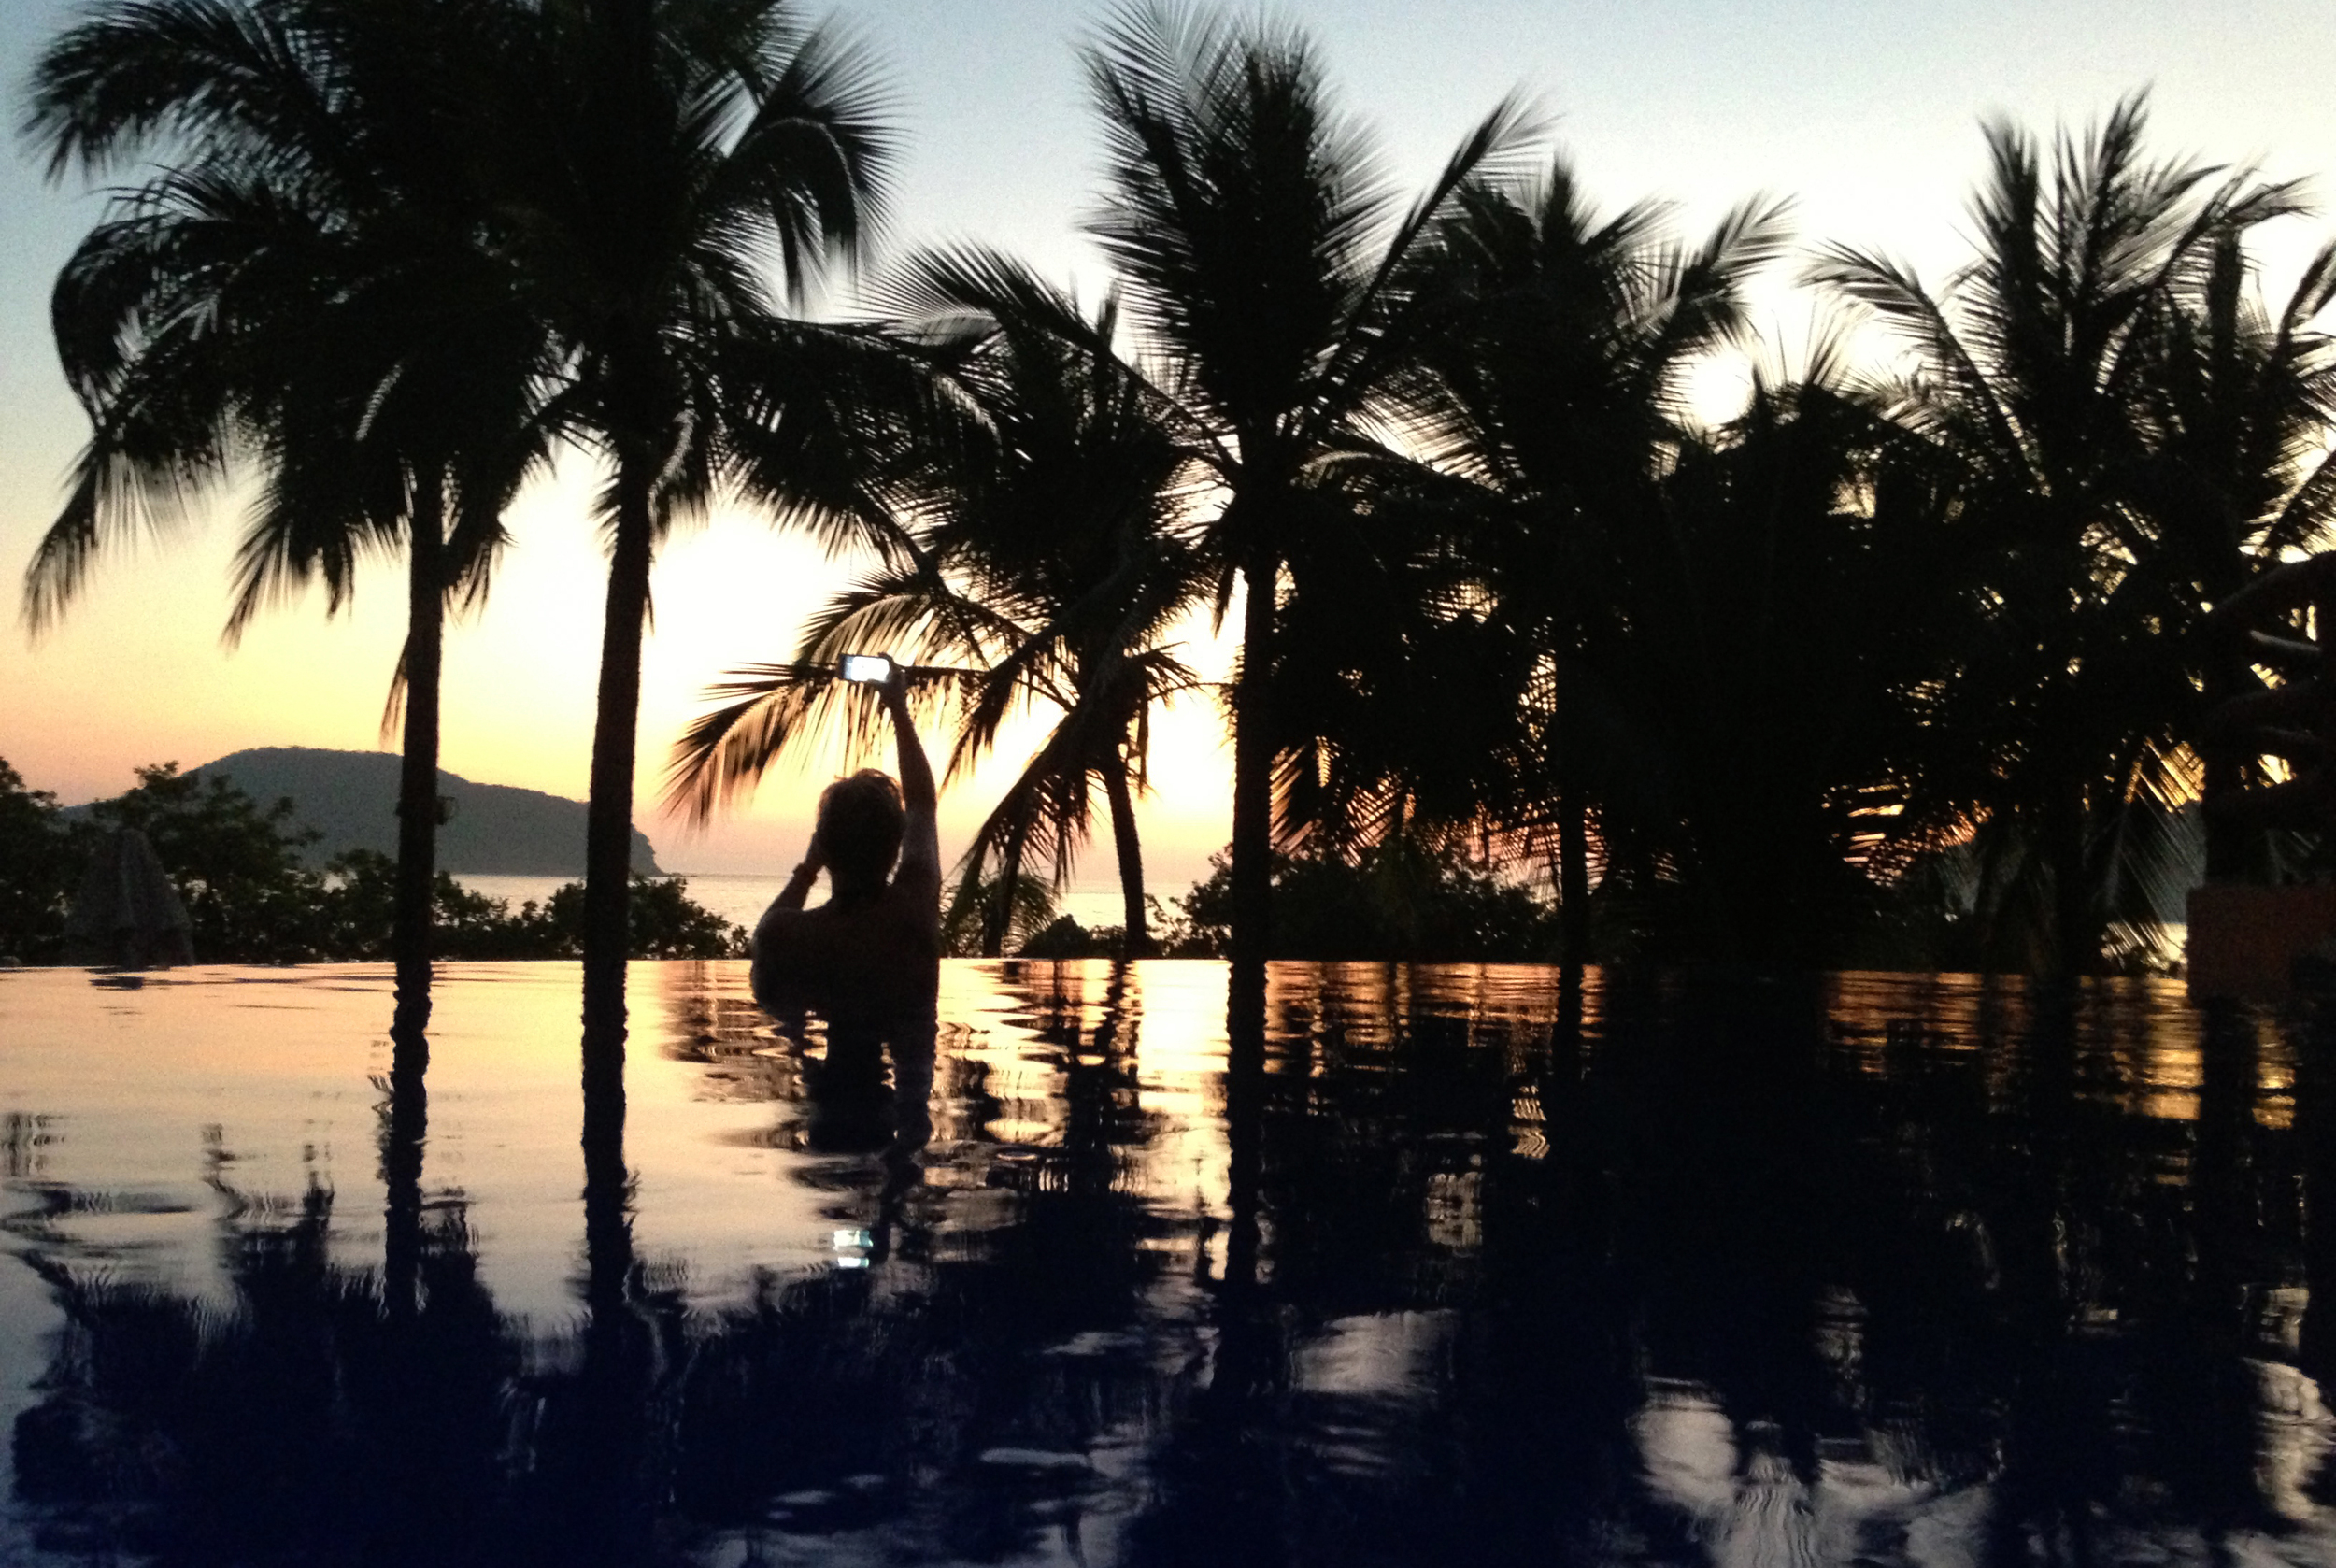  Reflecting palm fronds on a pool of tranquil blue and pink, the perspective plays tricks with one's mind.&nbsp; Where the infinity pool at Club Intrawest ends, the sea begins, as dusk descends over Playa La Ropa in Zihuatanejo, Mexico. ©Gail Fisher 